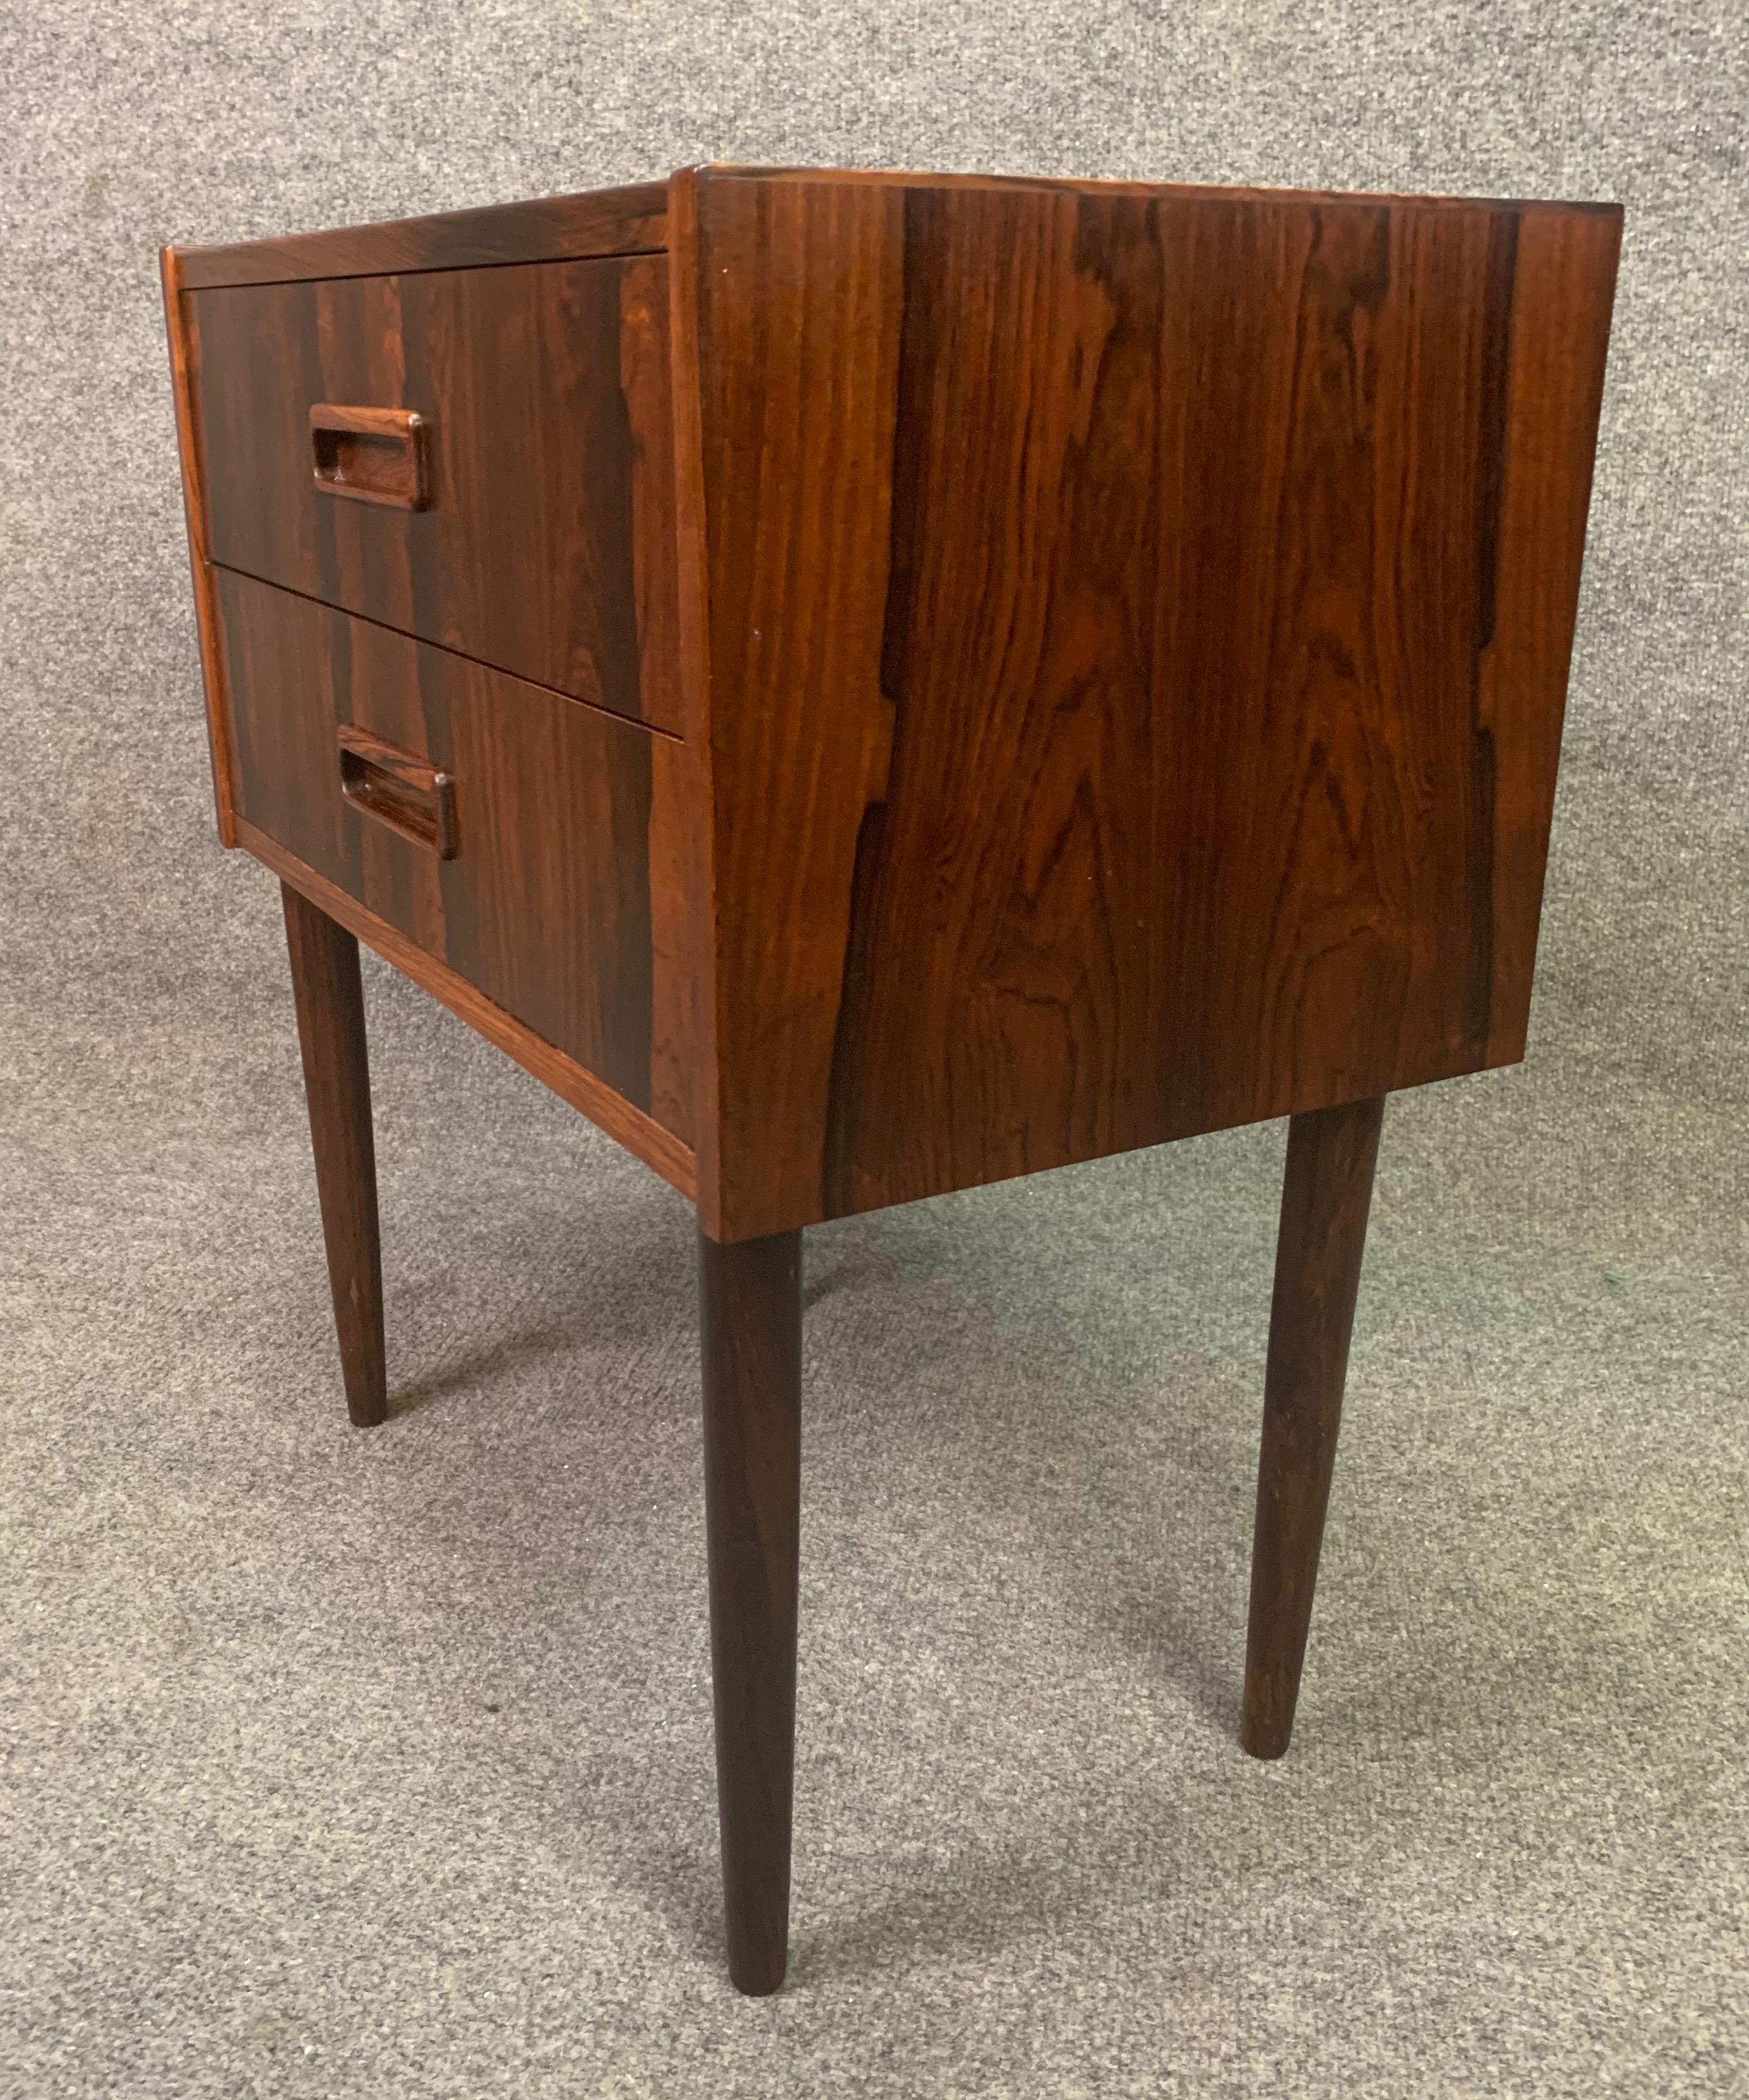 Mid-20th Century Vintage Danish Mid-Century Modern Rosewood Nightstand, Entry Chest